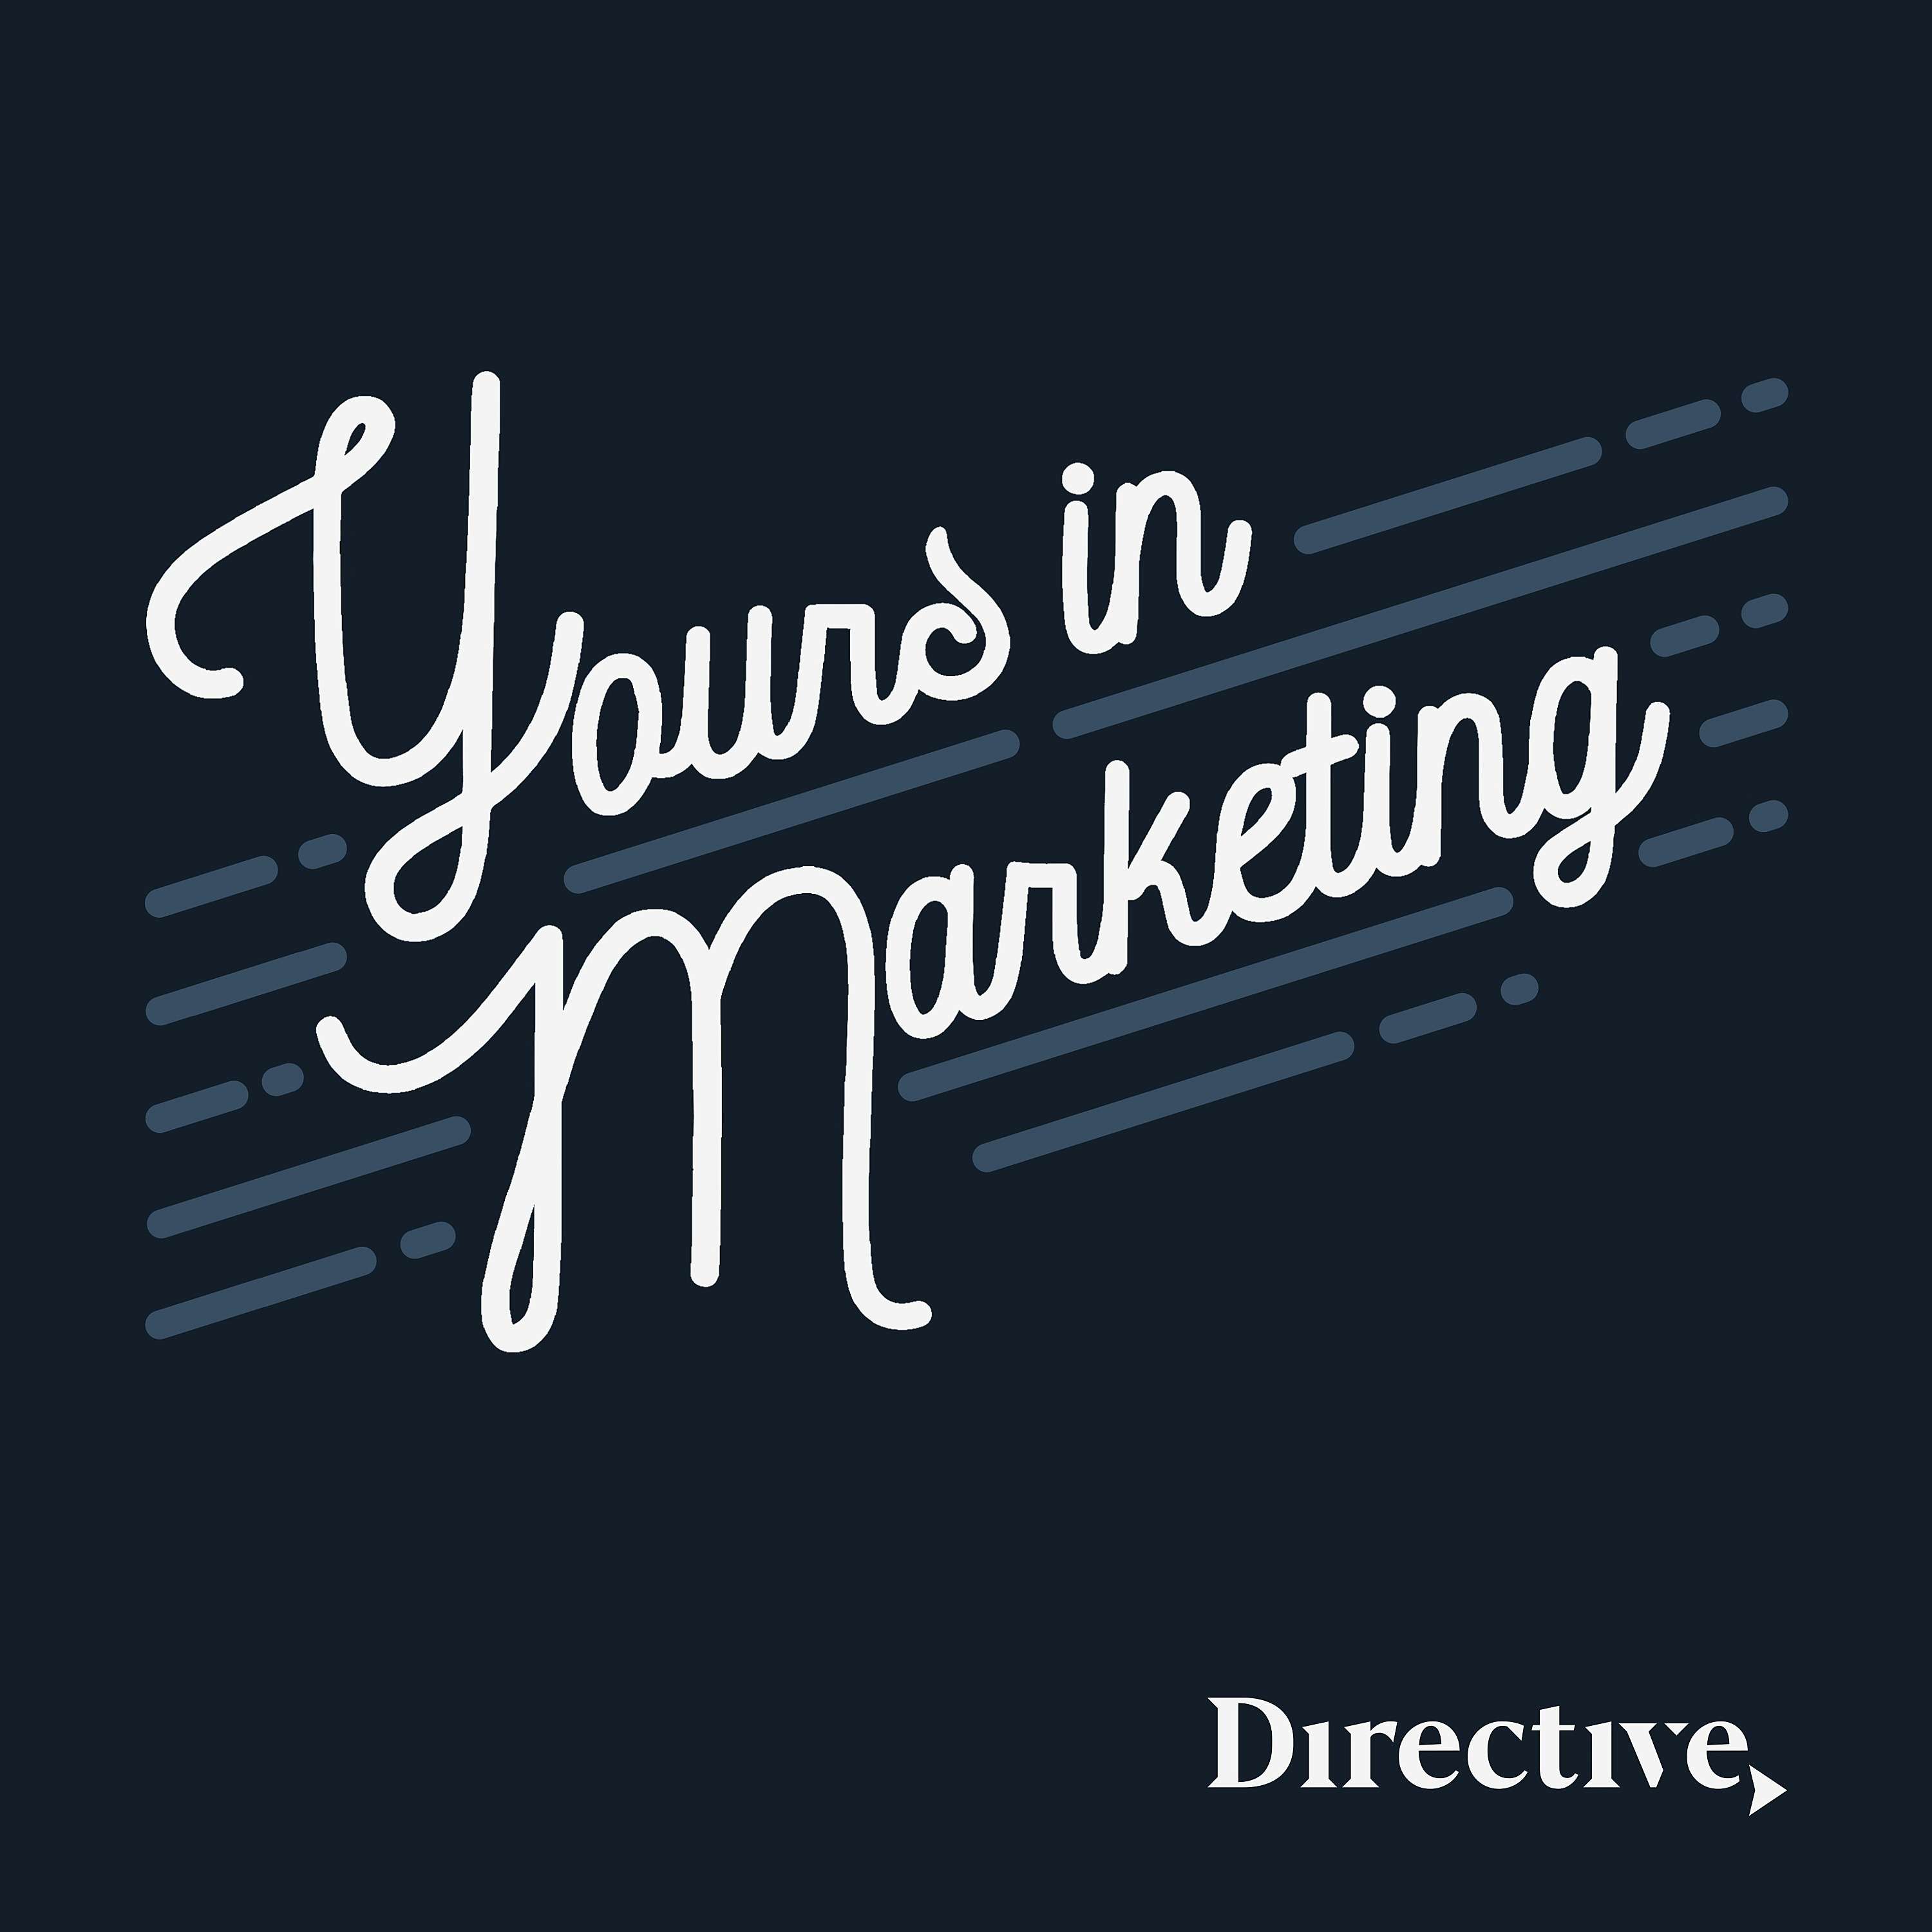 Yours in Marketing